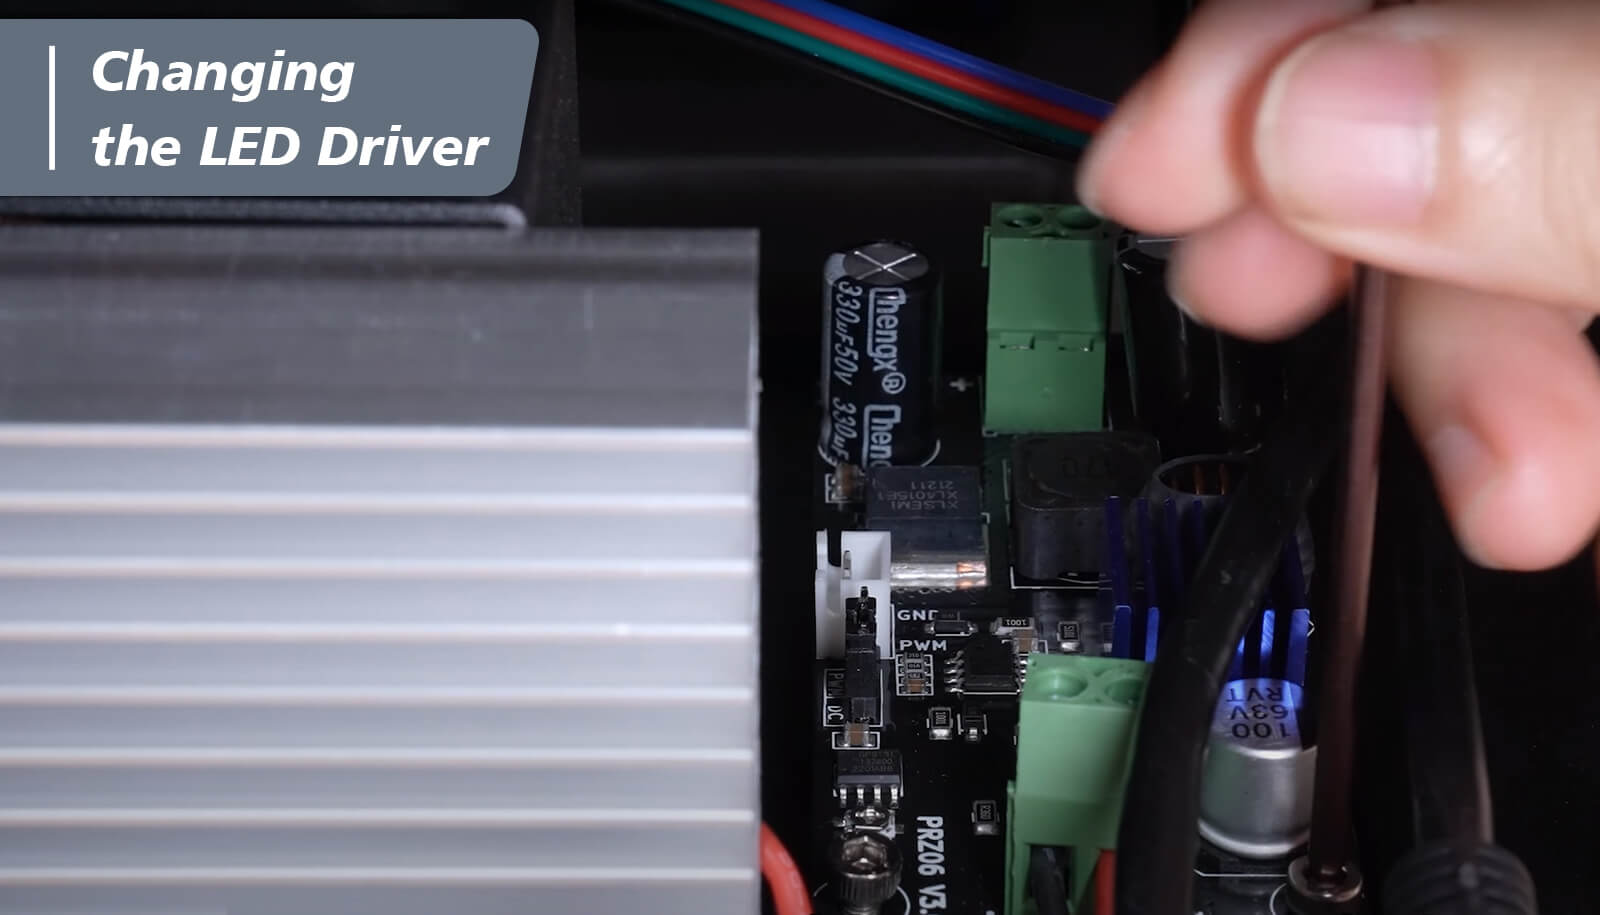 Remove the LED driver